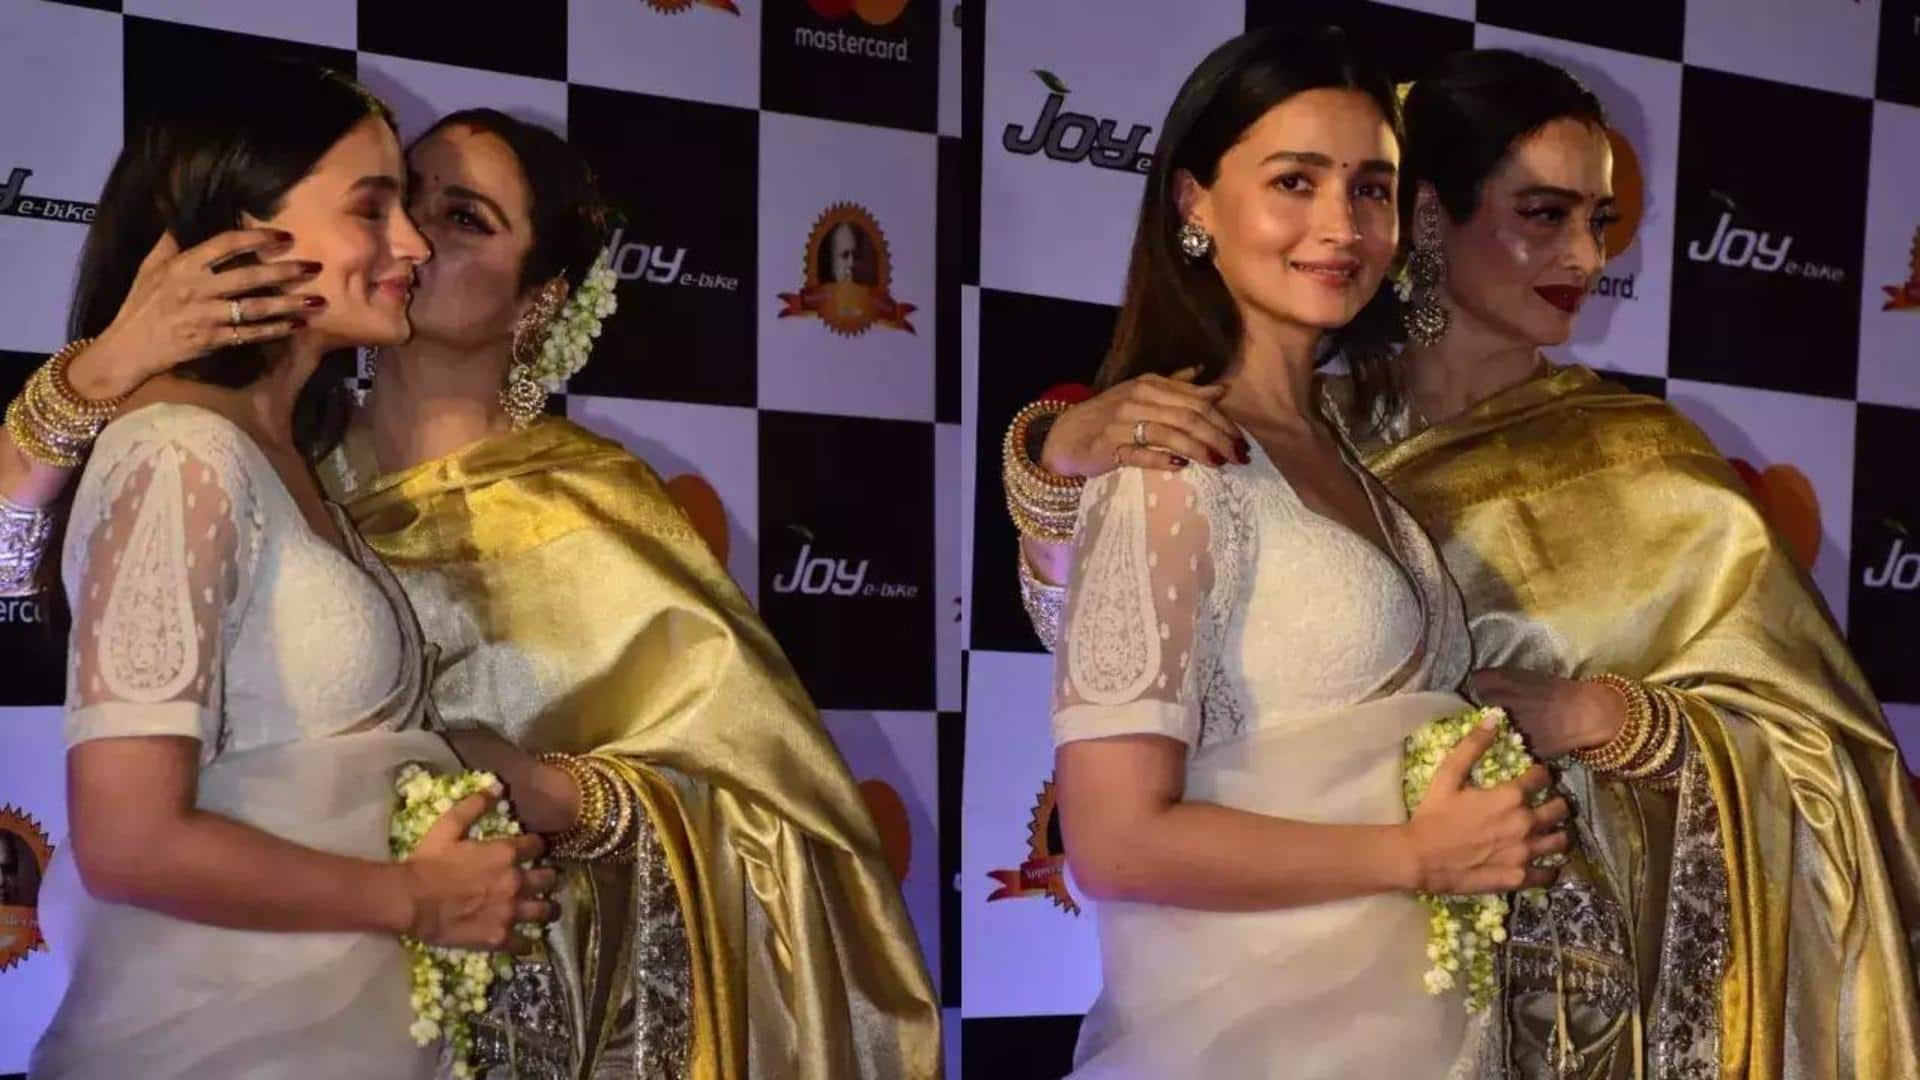 Dadasaheb Phalke Awards roundup: All the winners and must-see moments